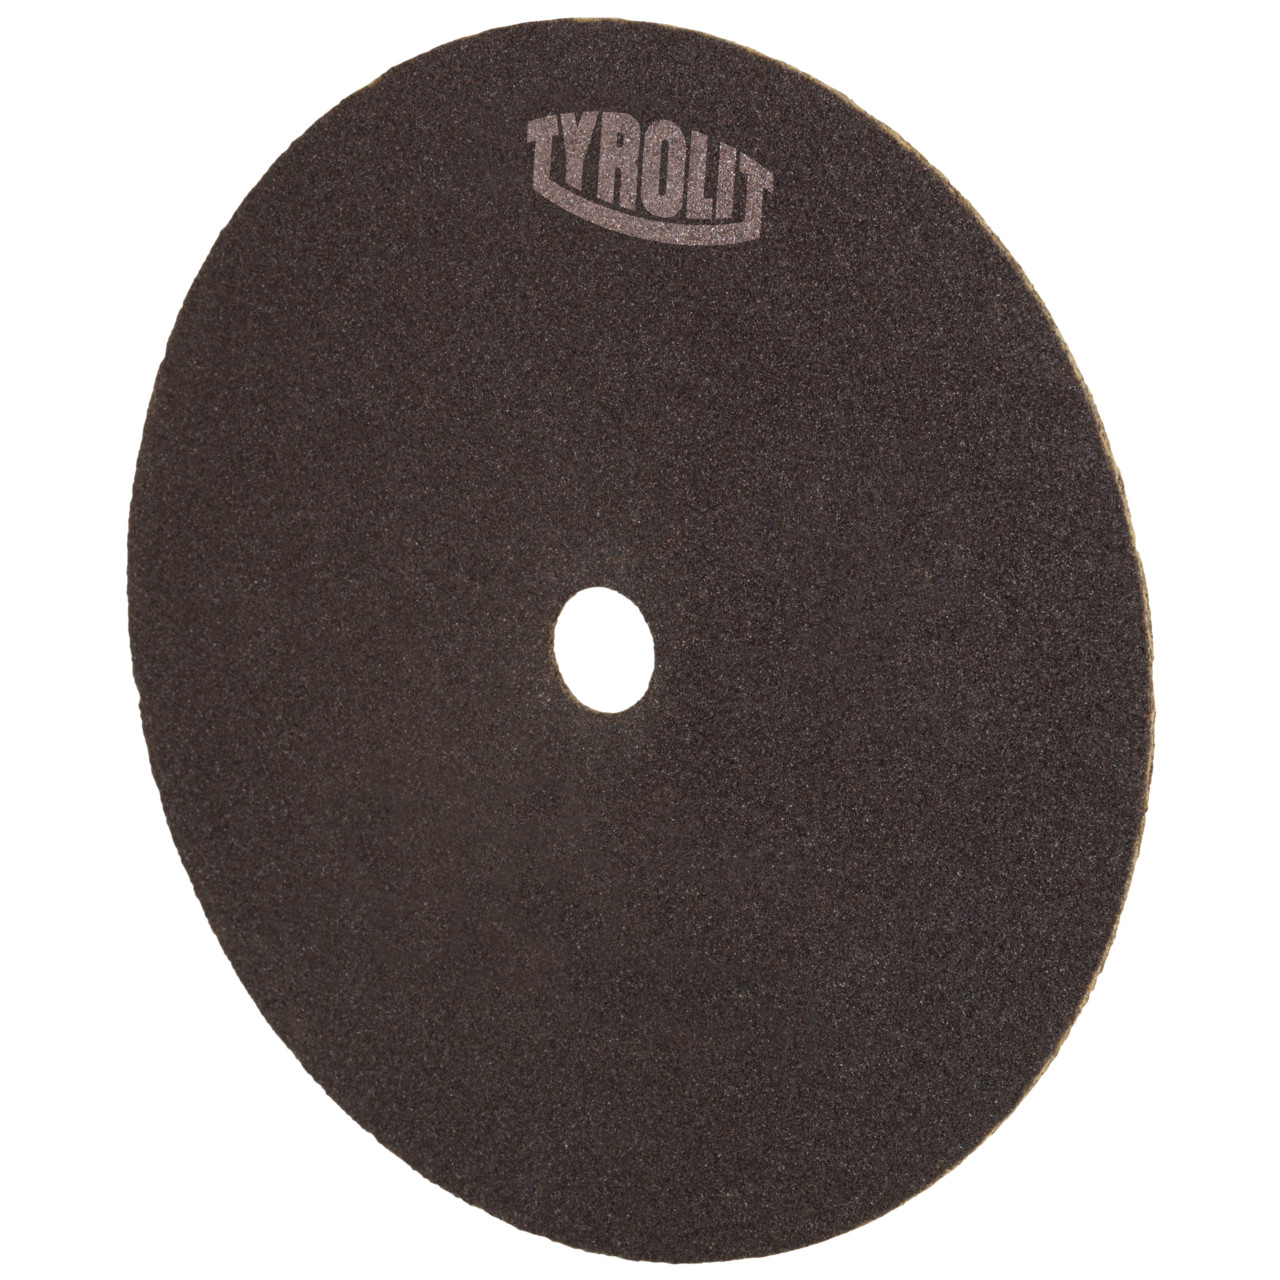 Tyrolit Cutting disc for cutting and saw sharpening DxDxH 200x1.6x25.4 For steel and HSS, shape: 41N - straight version (non-woven cutting disc), Art. 42809